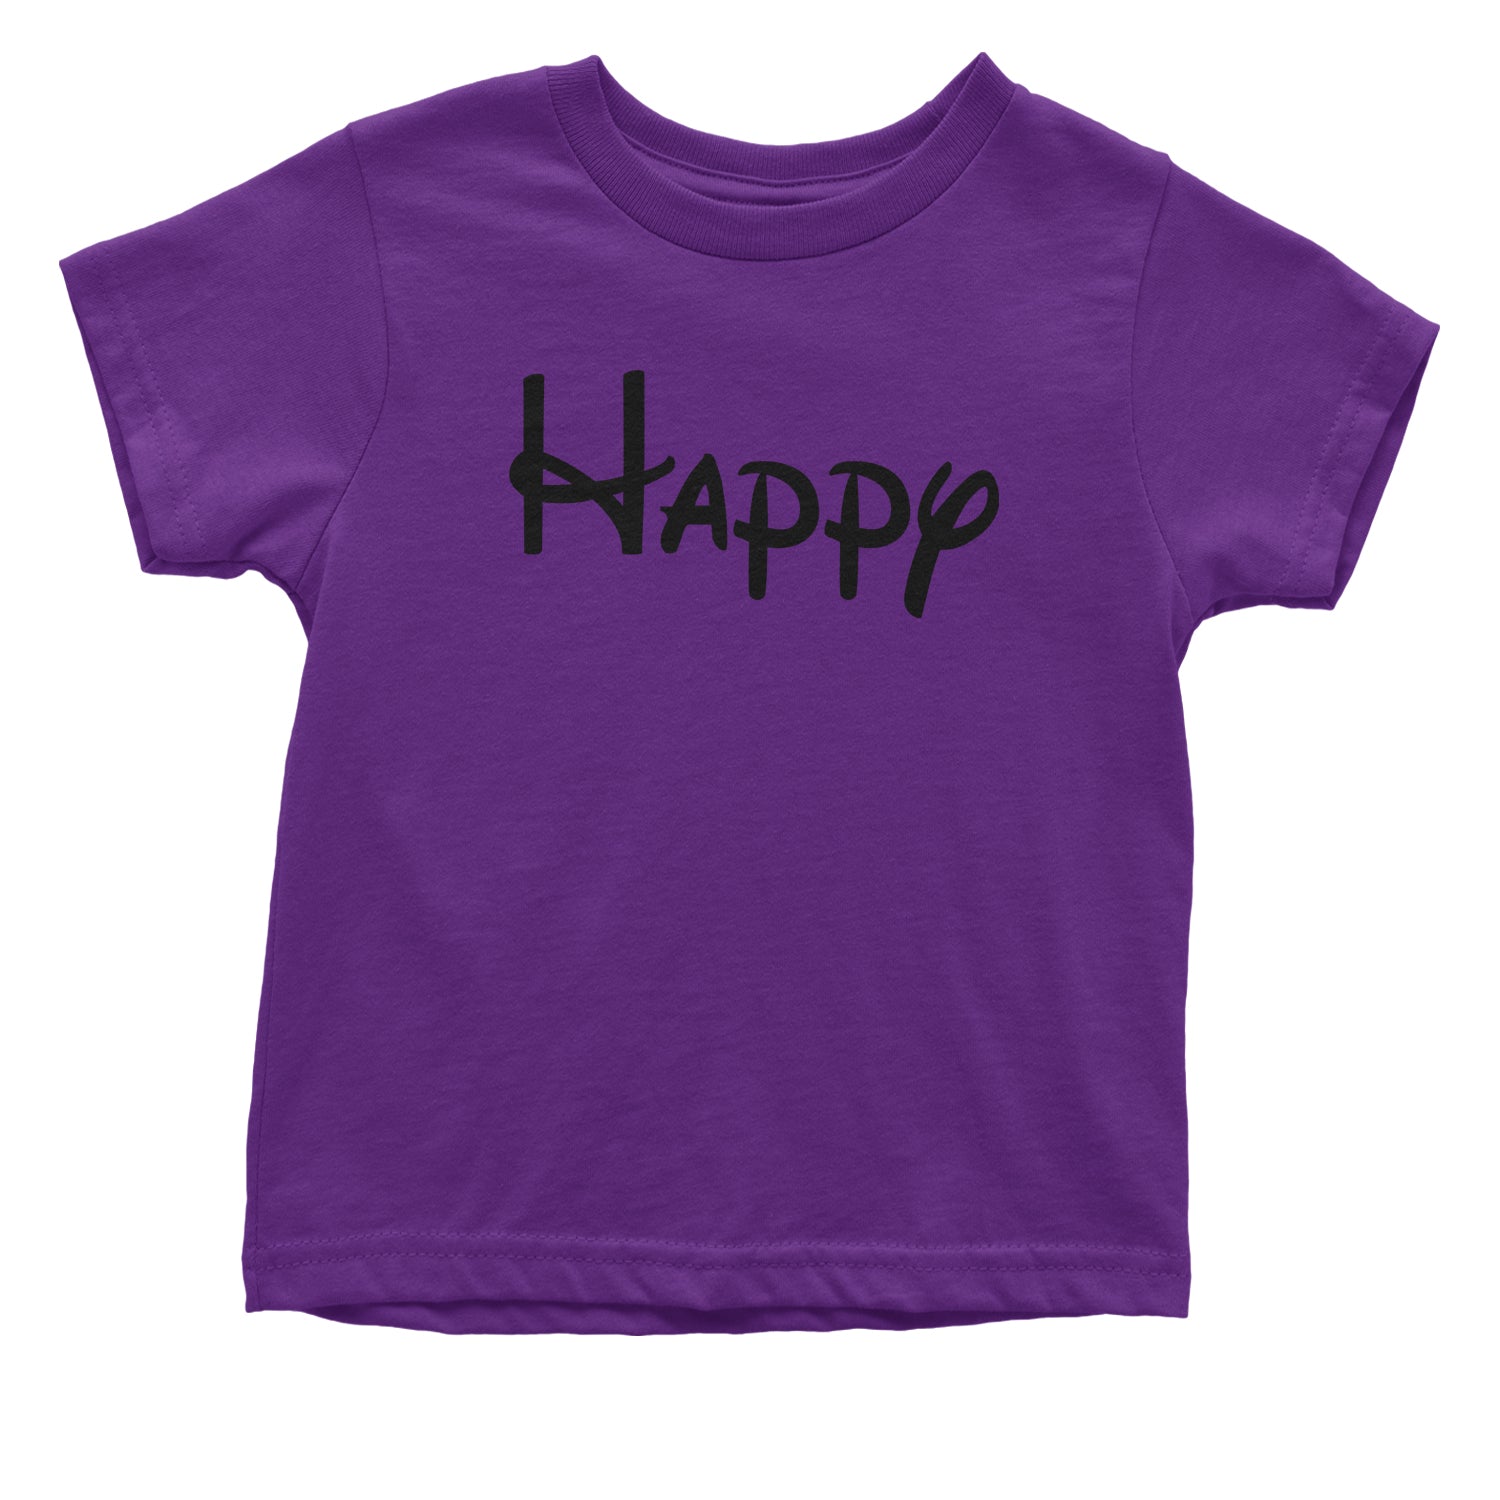 Happy - 7 Dwarfs Costume Toddler T-Shirt and, costume, dwarfs, group, halloween, matching, seven, snow, the, white by Expression Tees